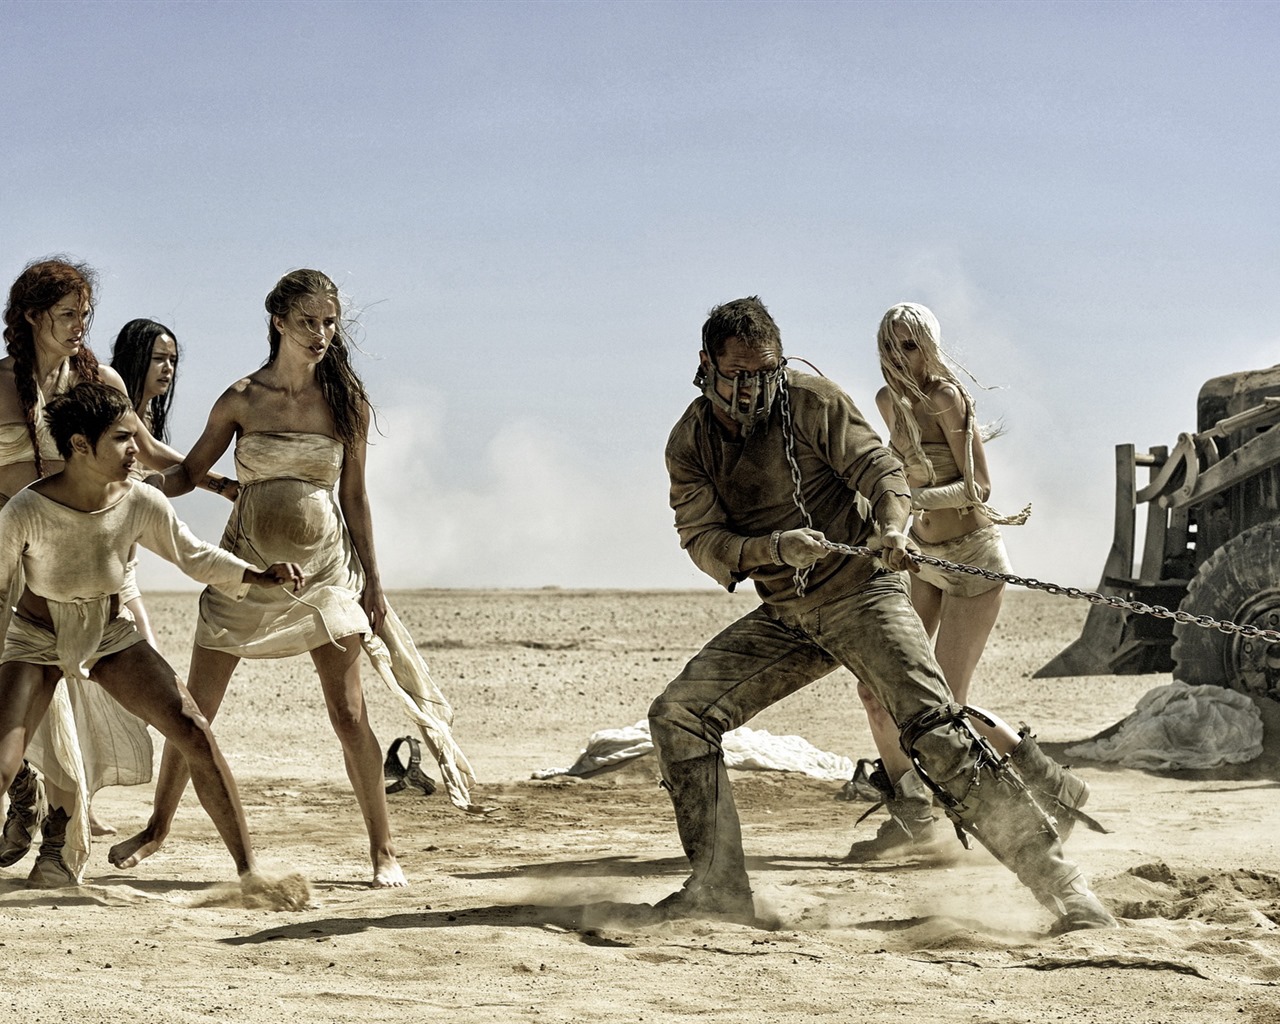 Mad Max: Fury Road, HD movie wallpapers #36 - 1280x1024